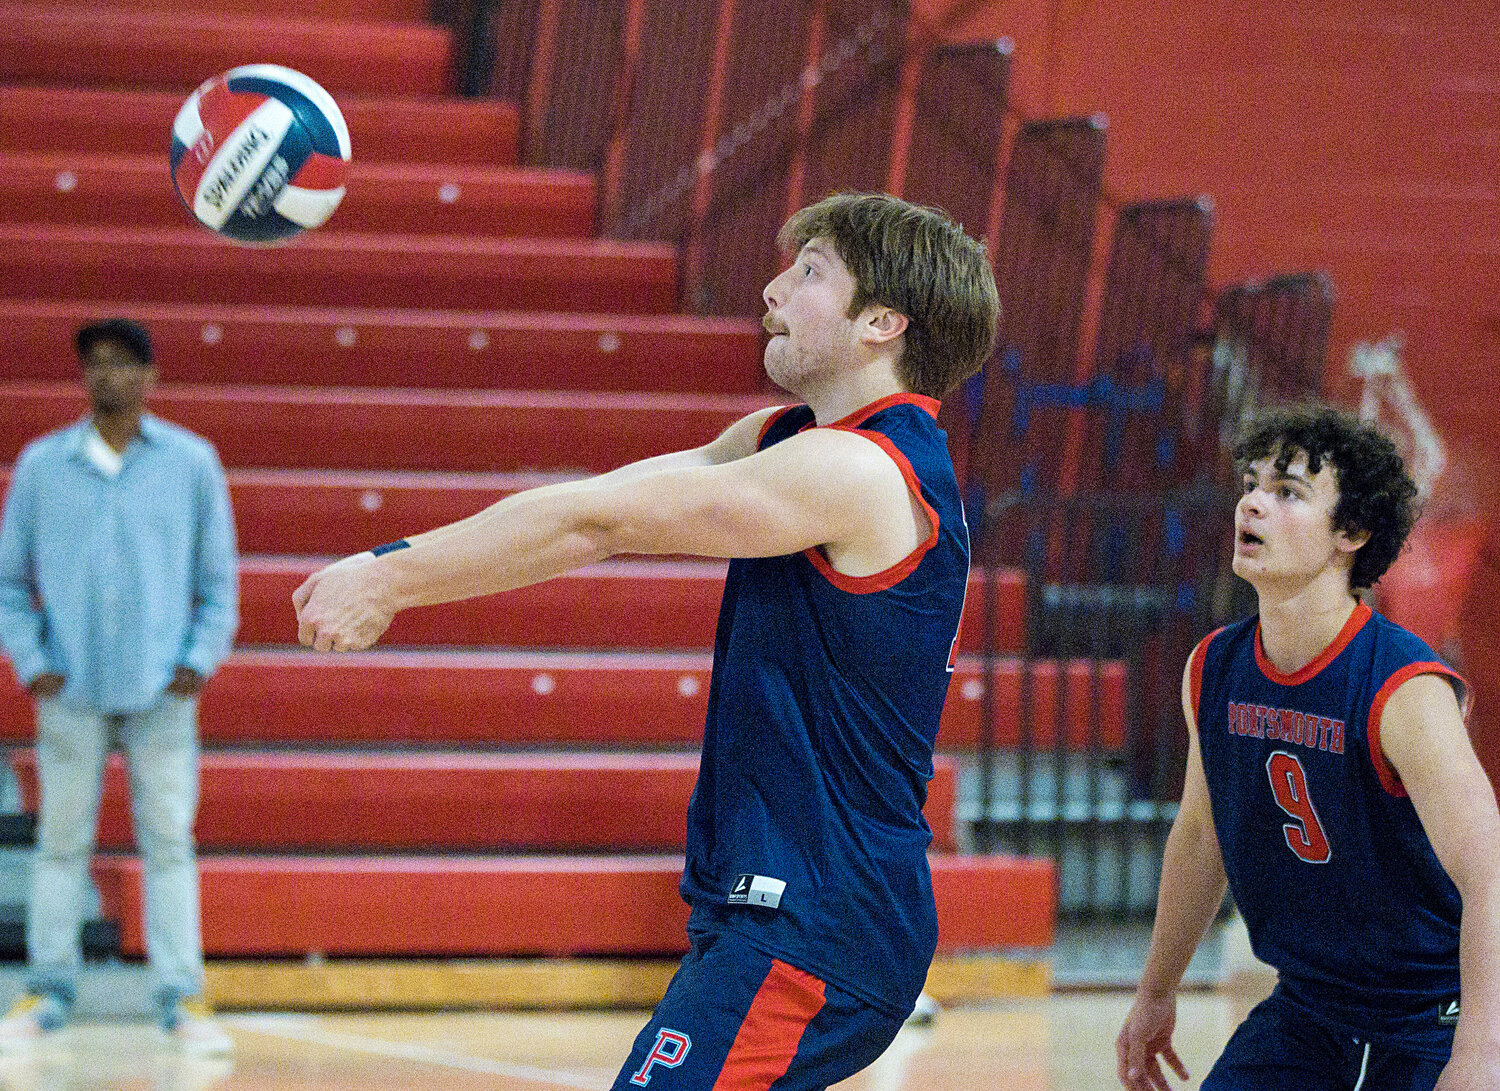 Adam Banks (right) looks on as Nick Waycuilis passes the ball to a teammate.